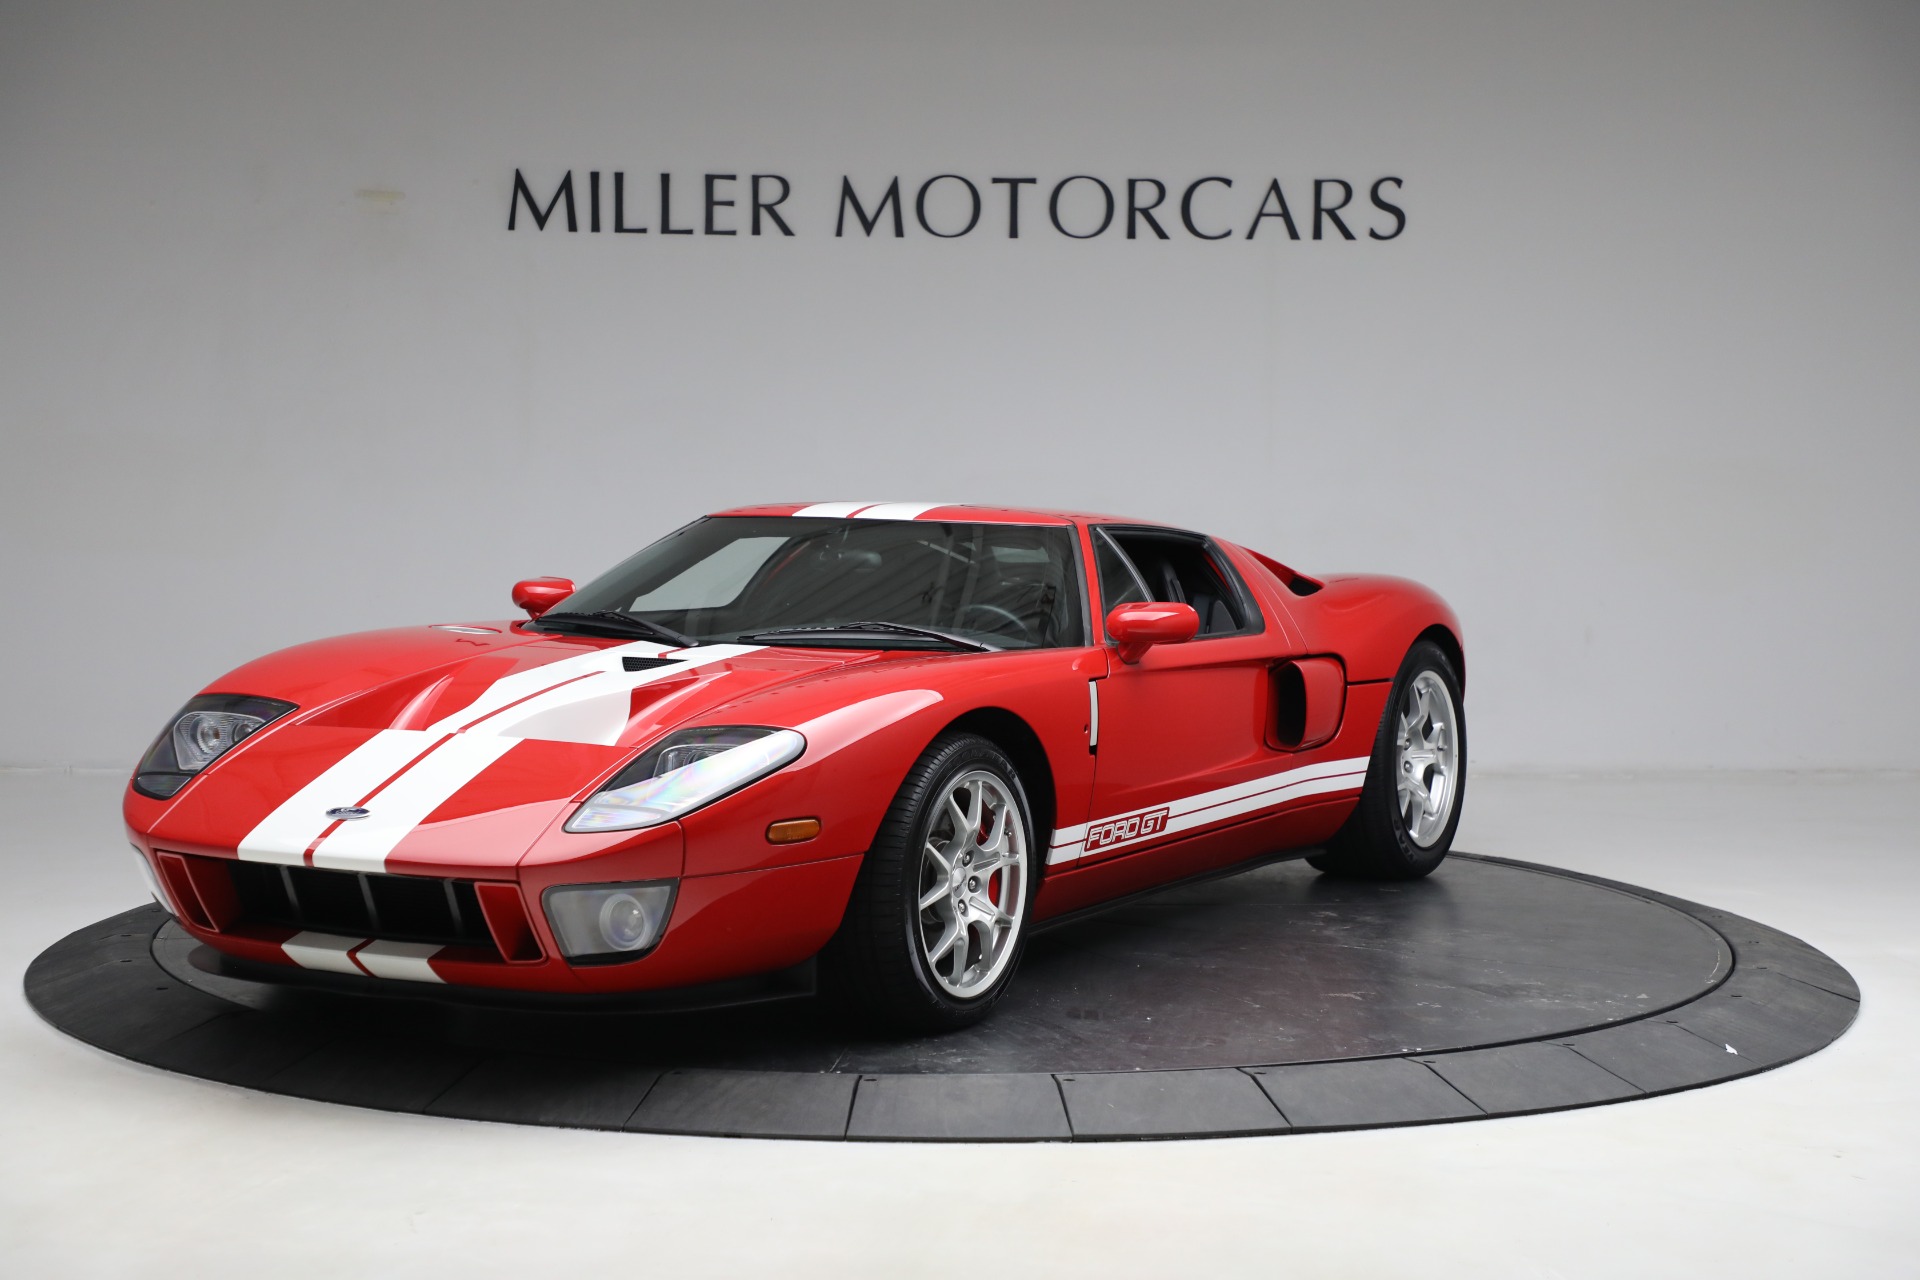 Used 2006 Ford GT for sale $425,900 at McLaren Greenwich in Greenwich CT 06830 1